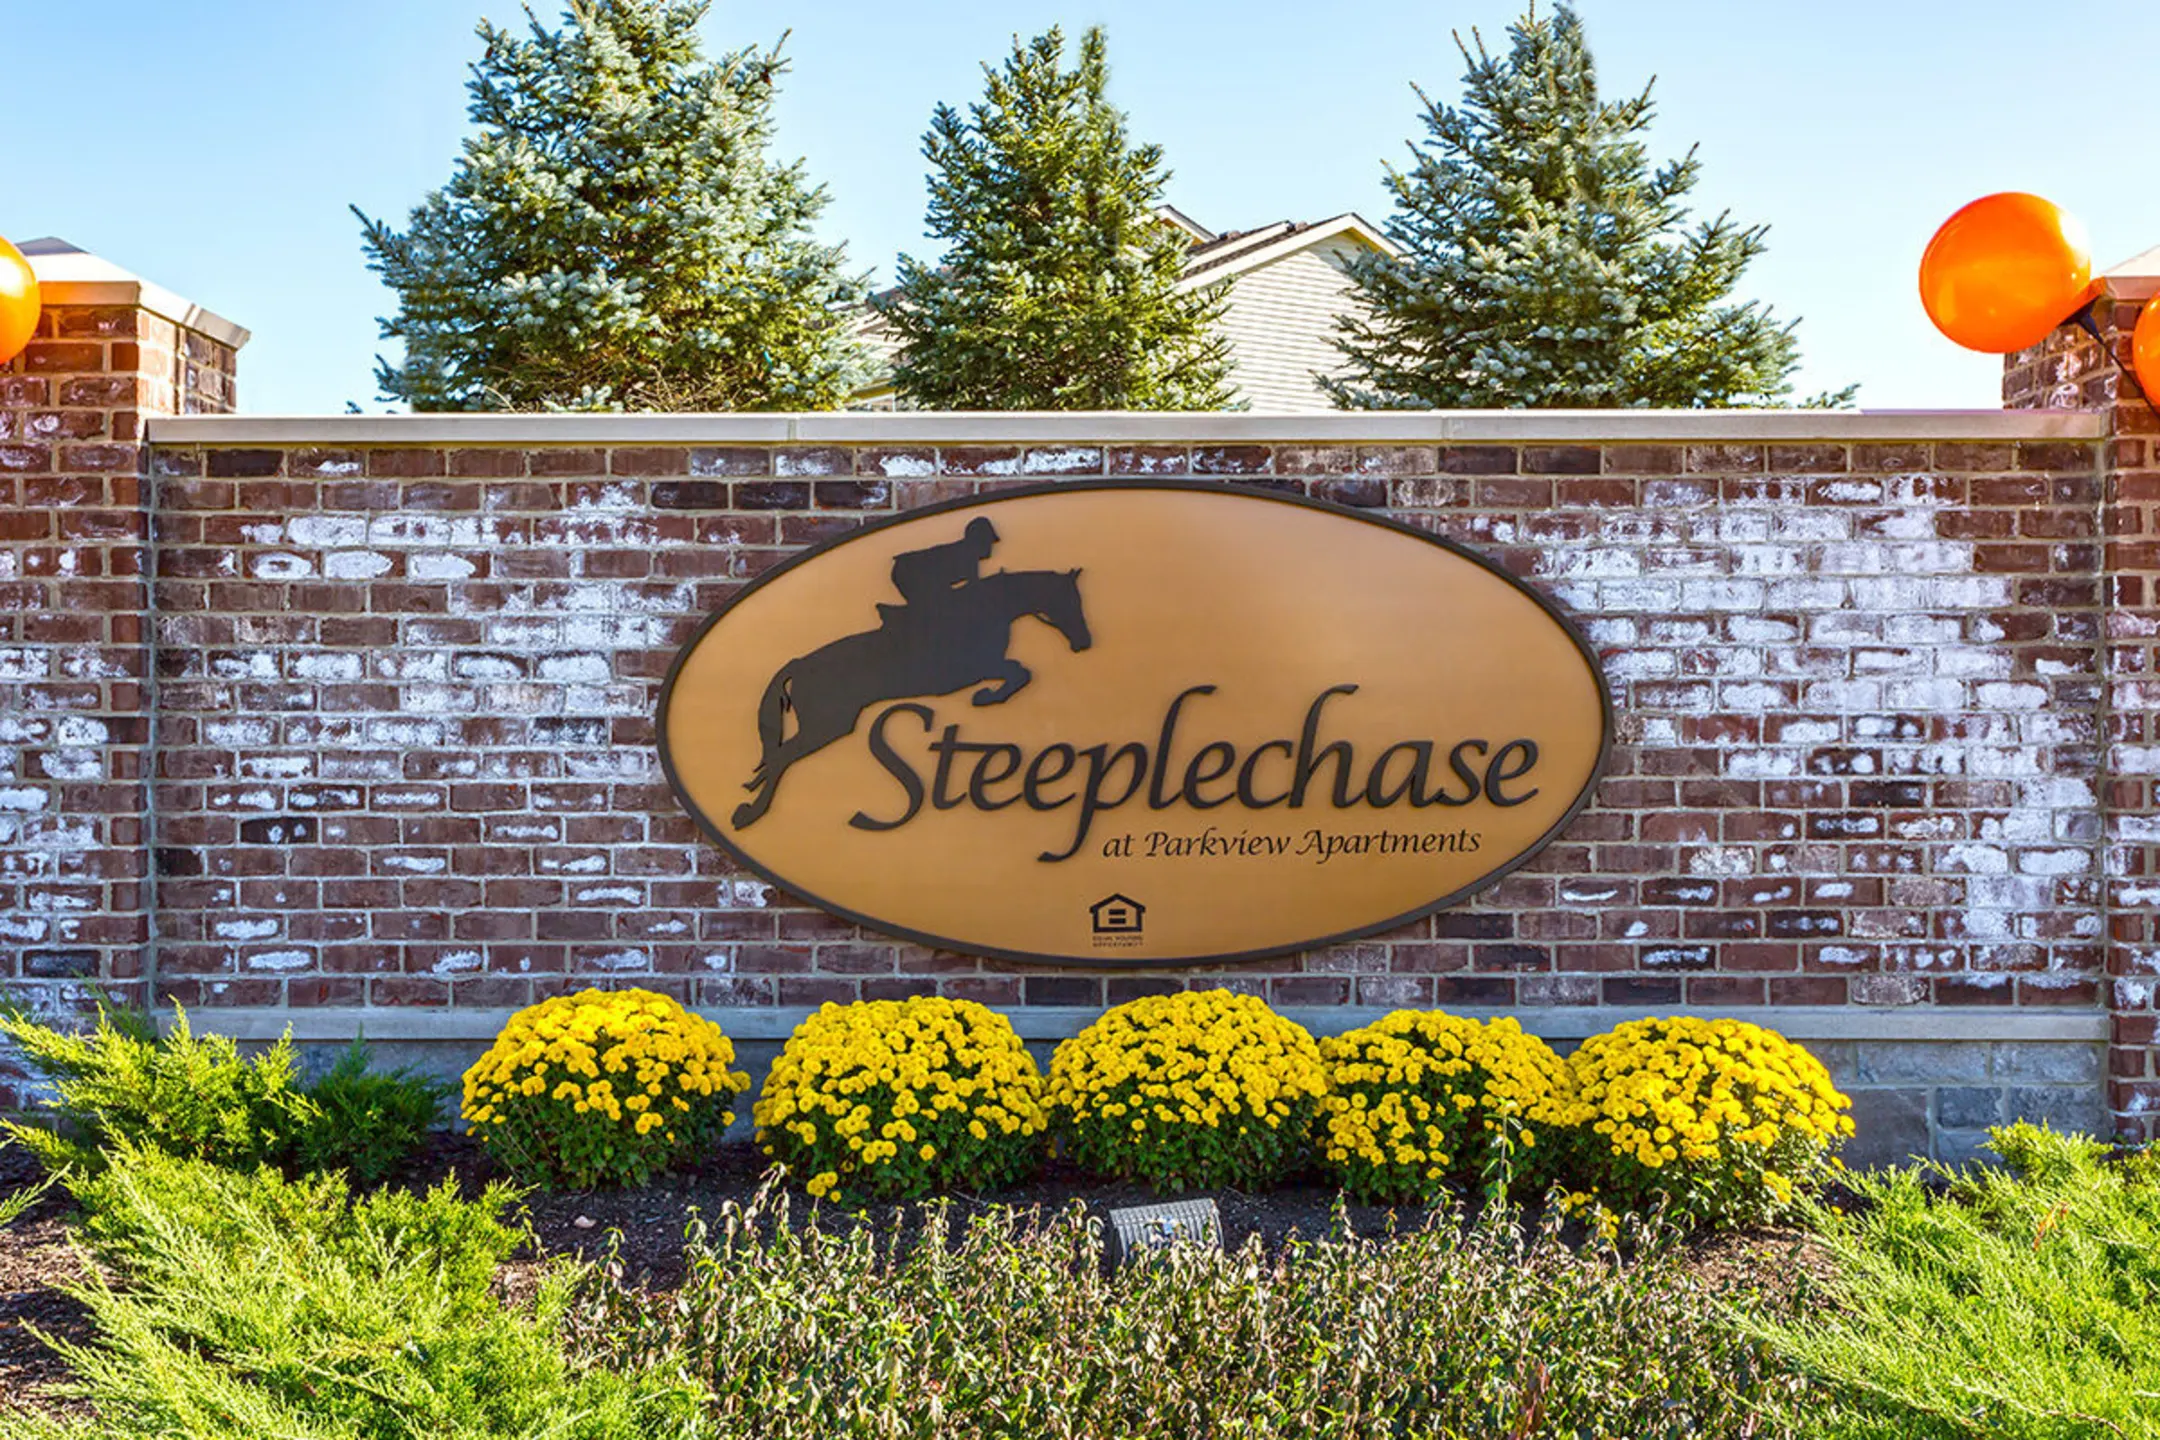 Steeplechase at Parkview Apartments - Fort Wayne, IN